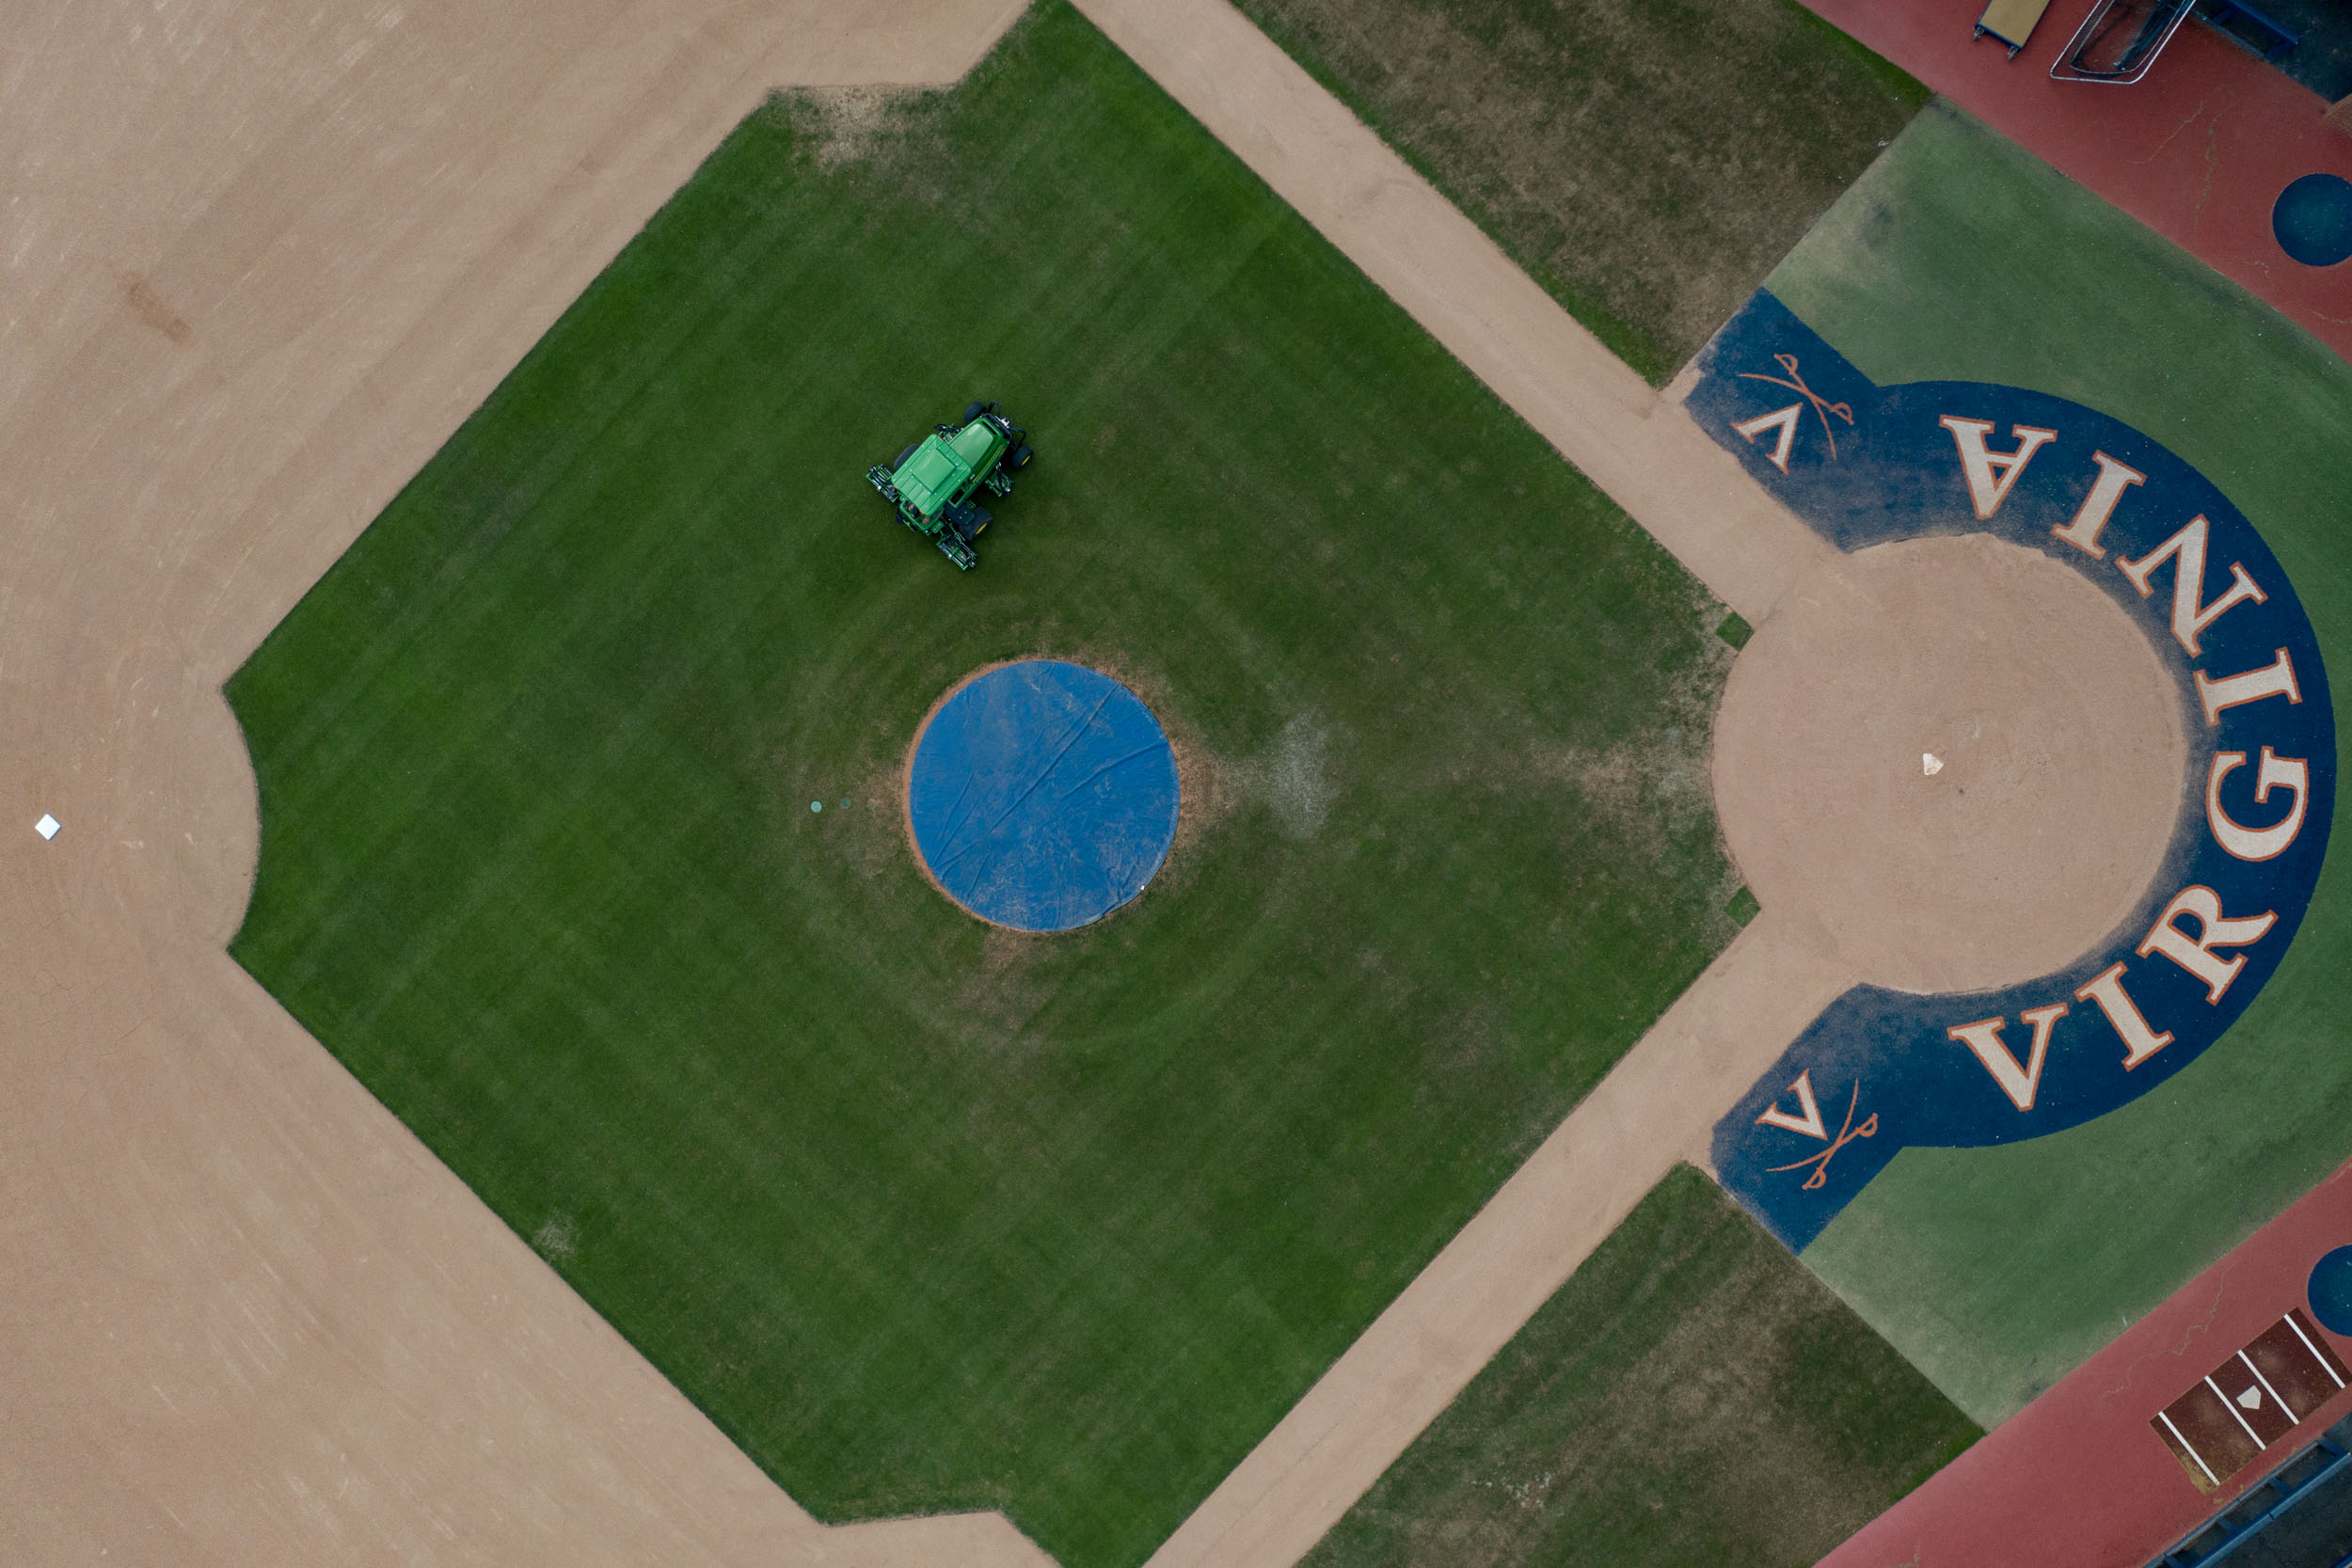 Arial View of the Baseball field